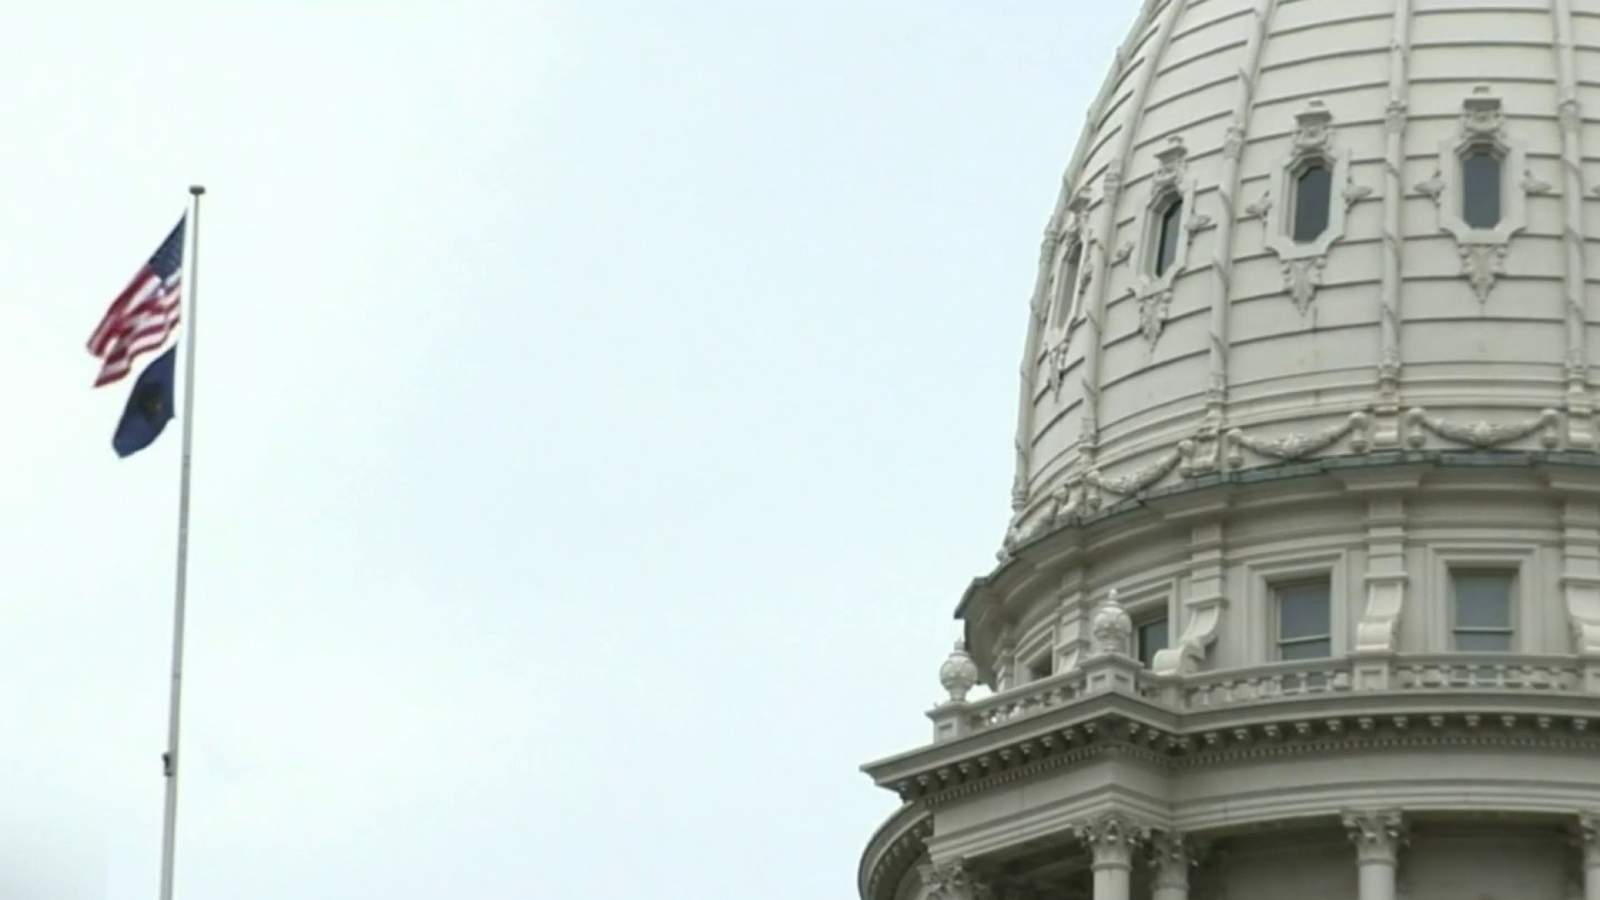 Local leaders press Michigan lawmakers for COVID financial relief measures